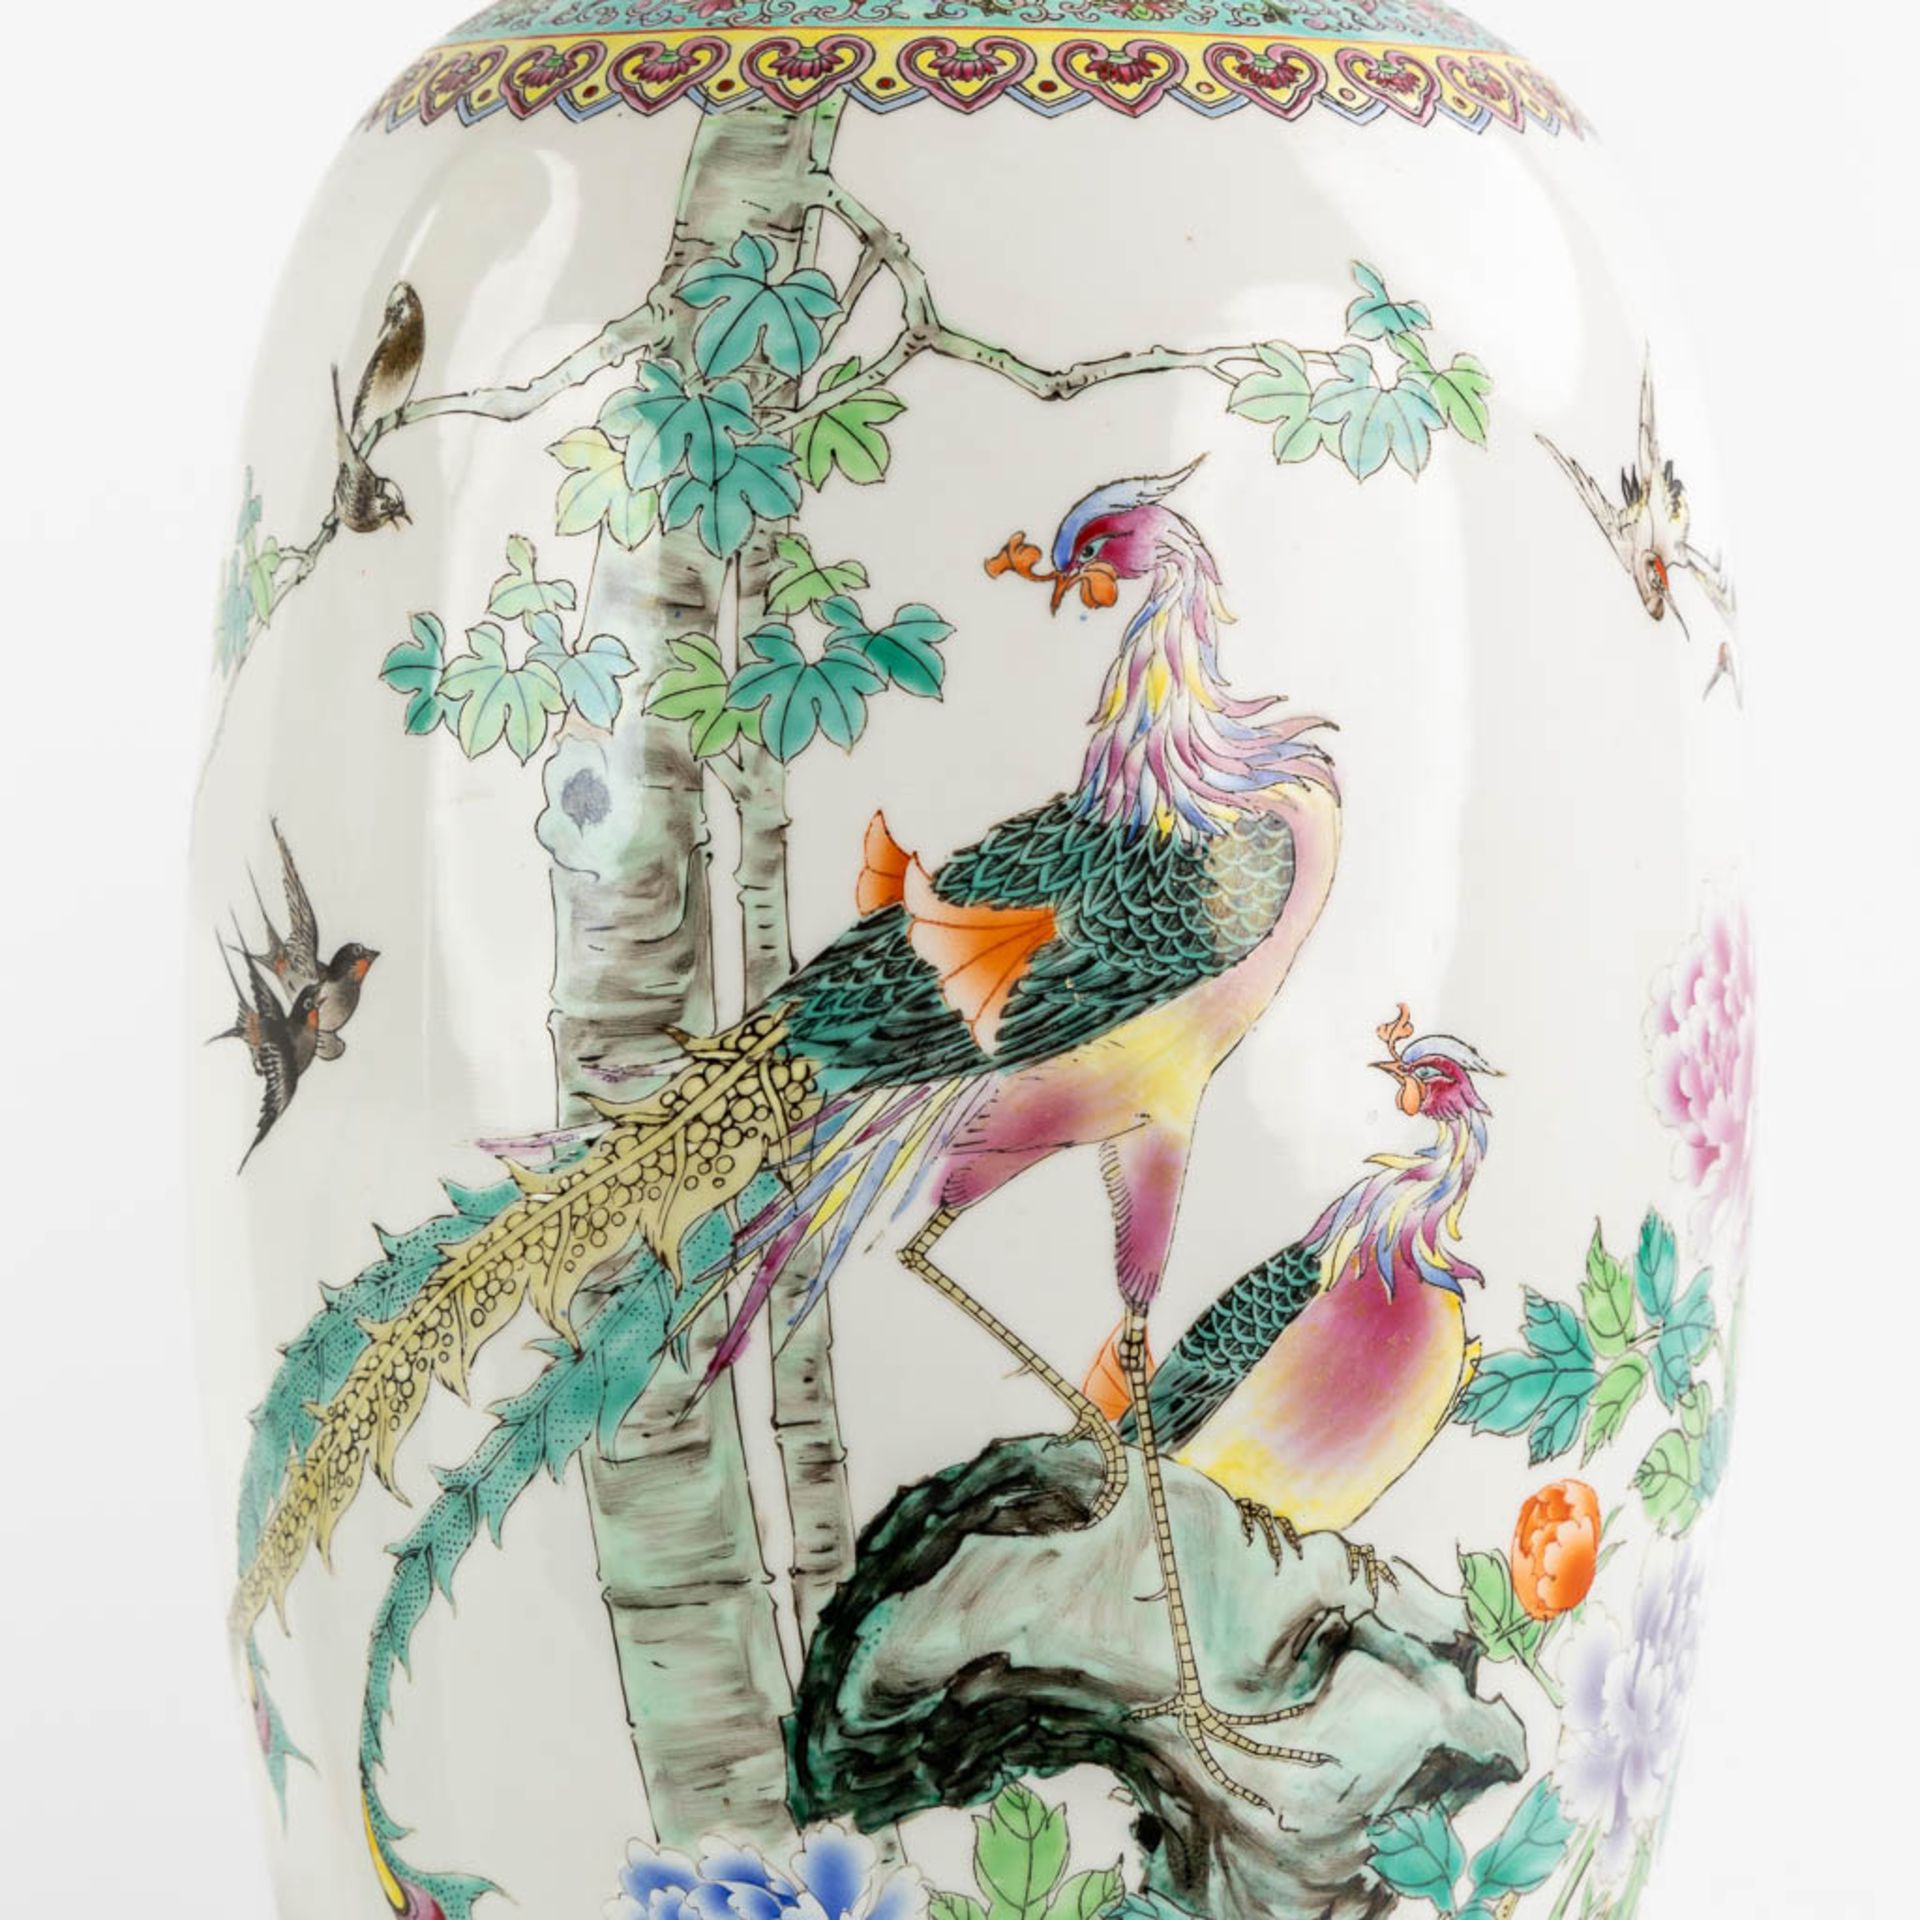 A decorative pair of Chinese vases with a Phoenix decor, 20th C. (H:62 x D:26 cm) - Image 11 of 16